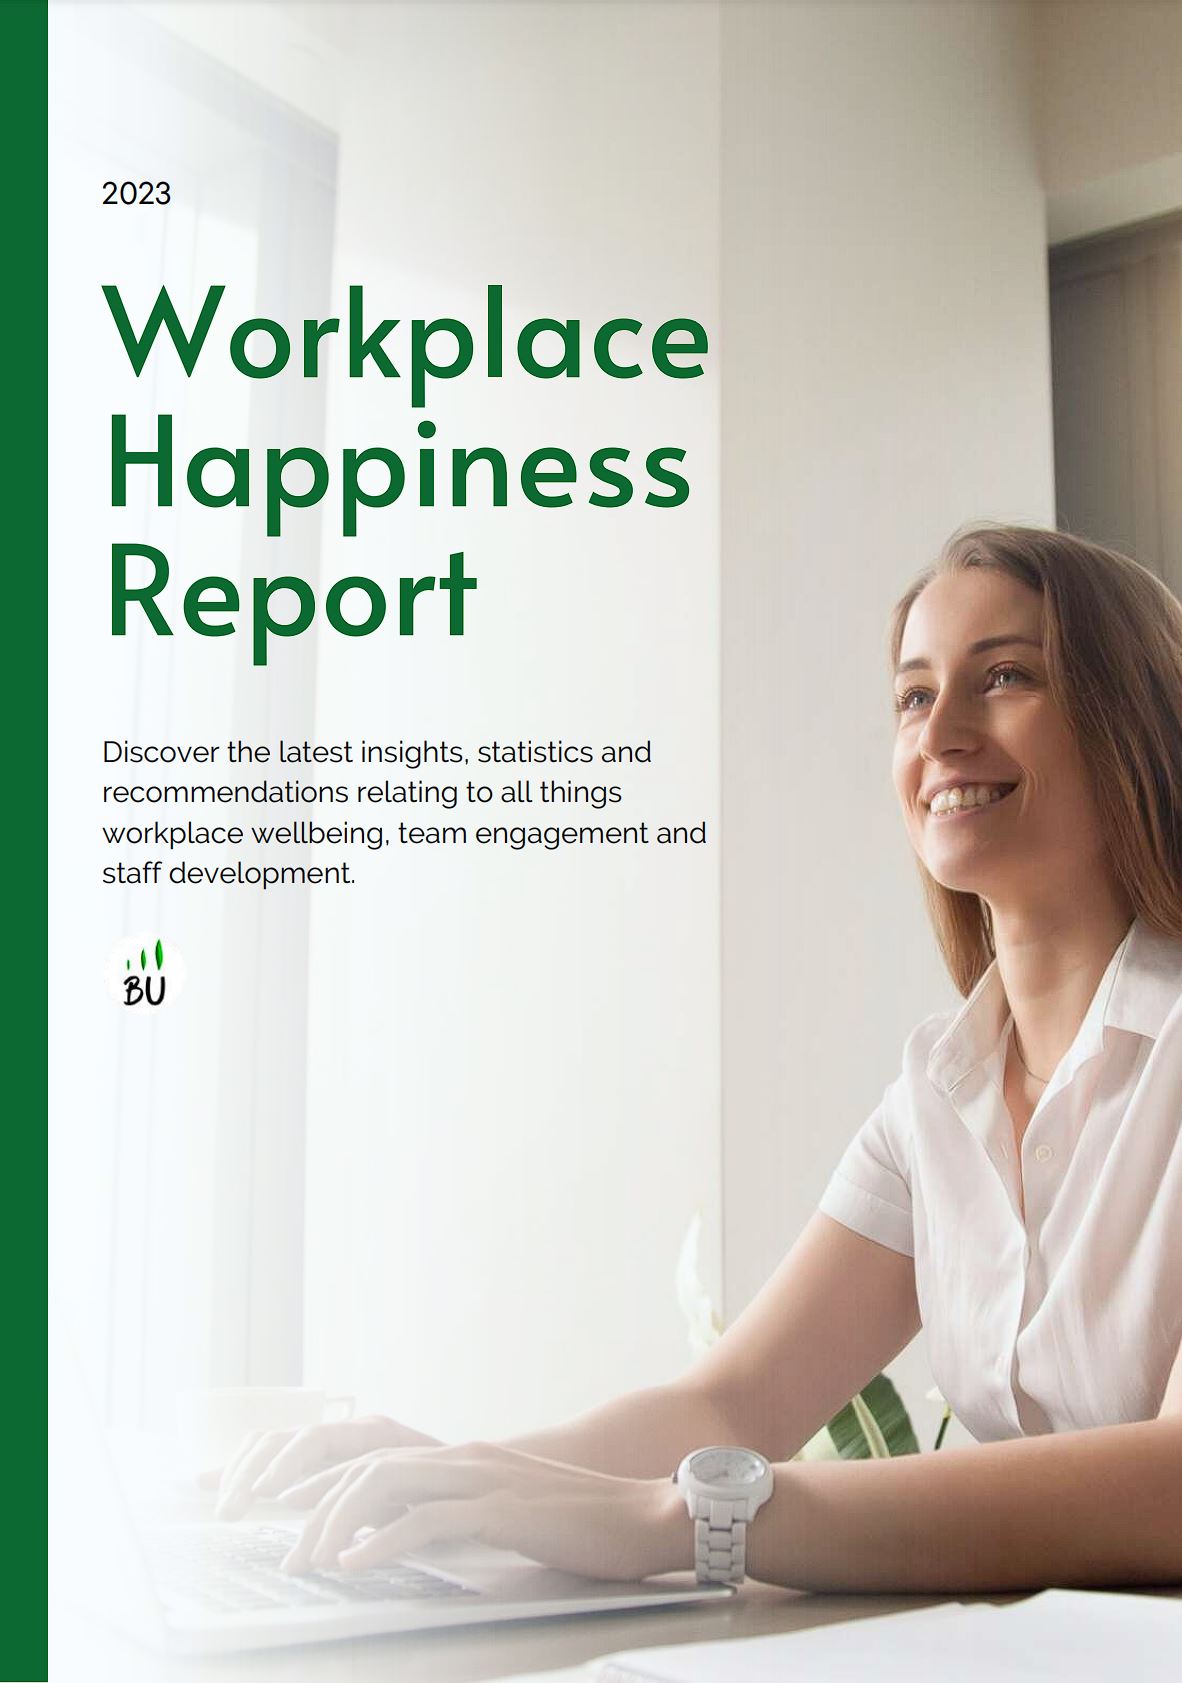 2023 workplace happiness report cover